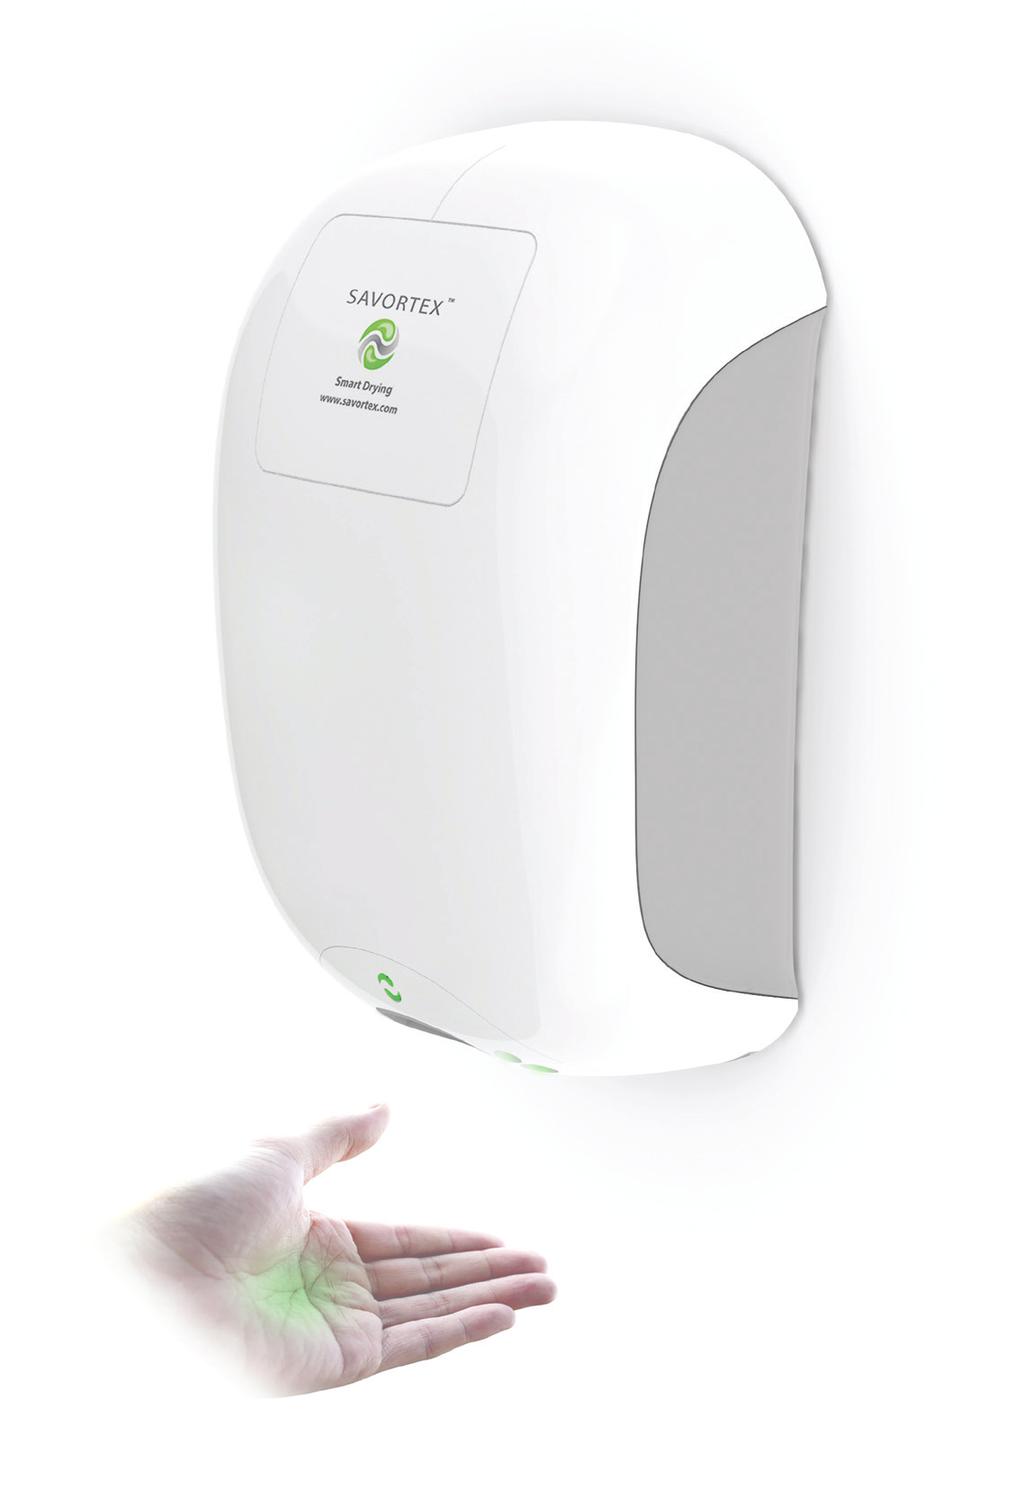 EcoCurveTM warm air hand dryer The EcoCurve Hand Dryer uses SAVORTEX s Patented Energy Recovery & Curved Air Drying technology.